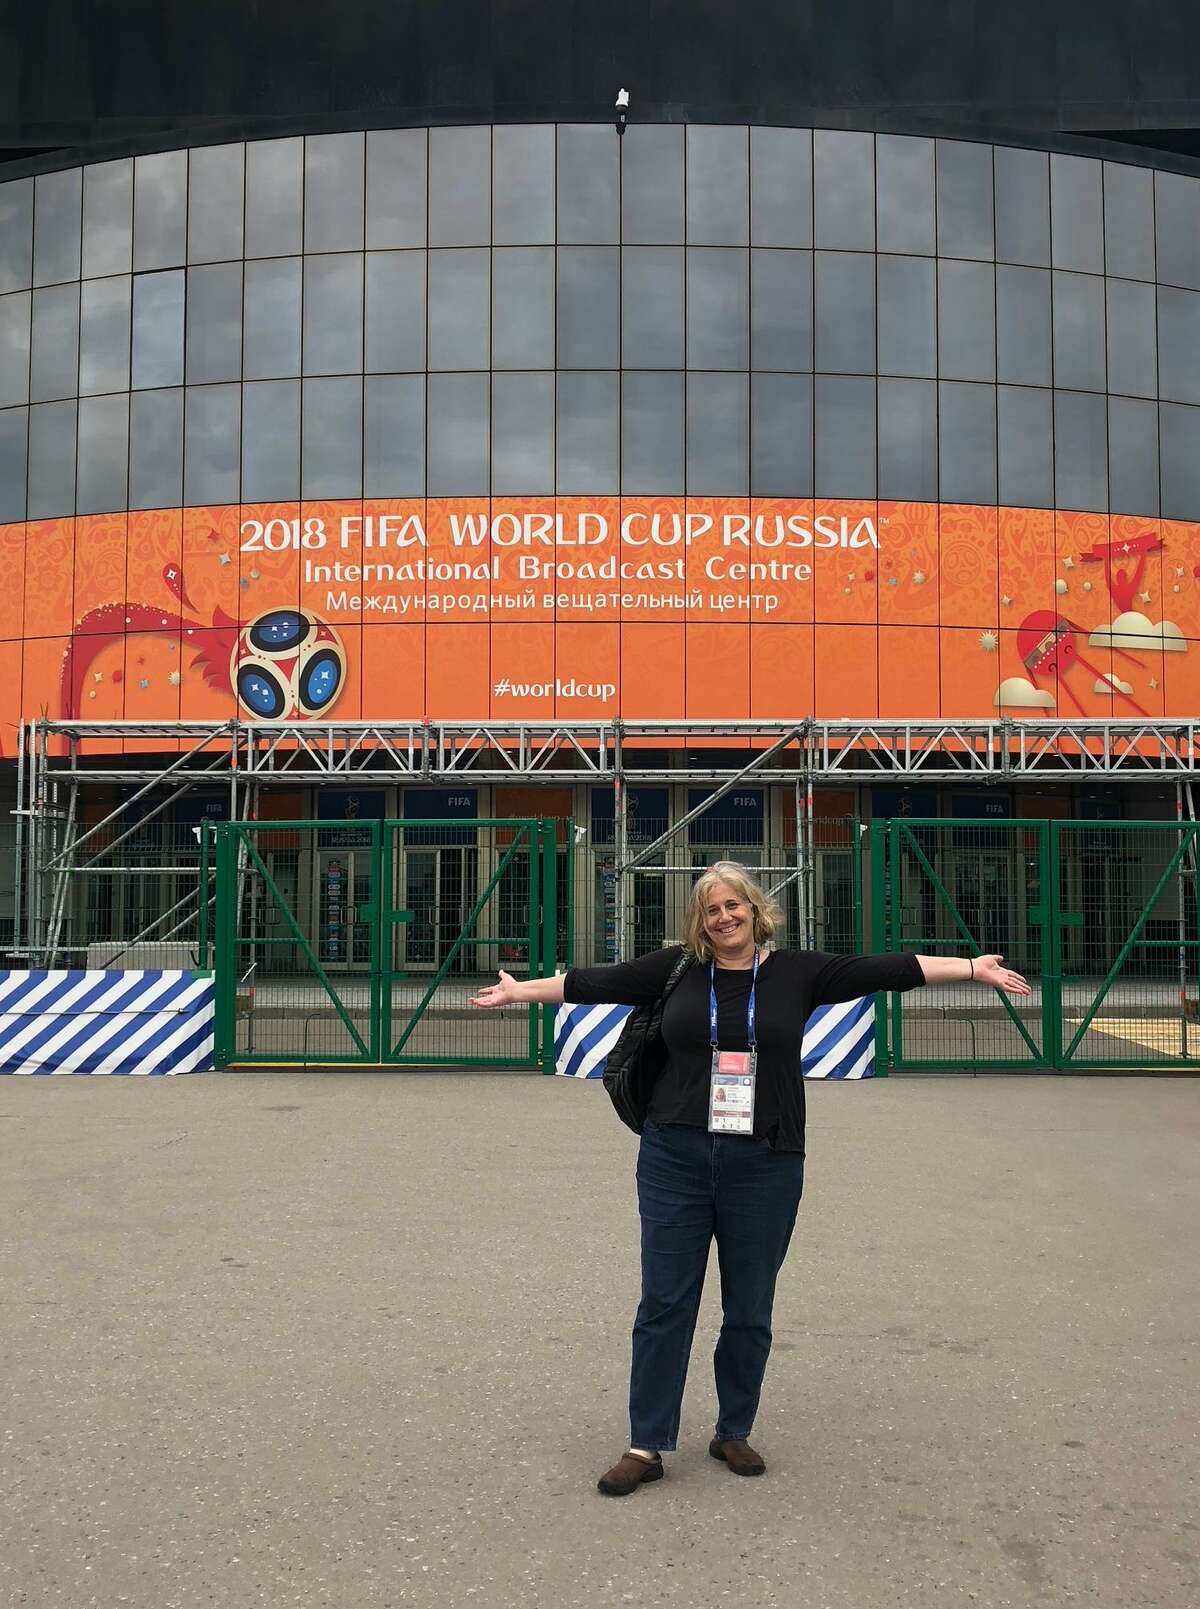 From Dash analyst to World Cup, Jen Cooper has come a long way to stand in front of Moscow’s International Broadcast Center.